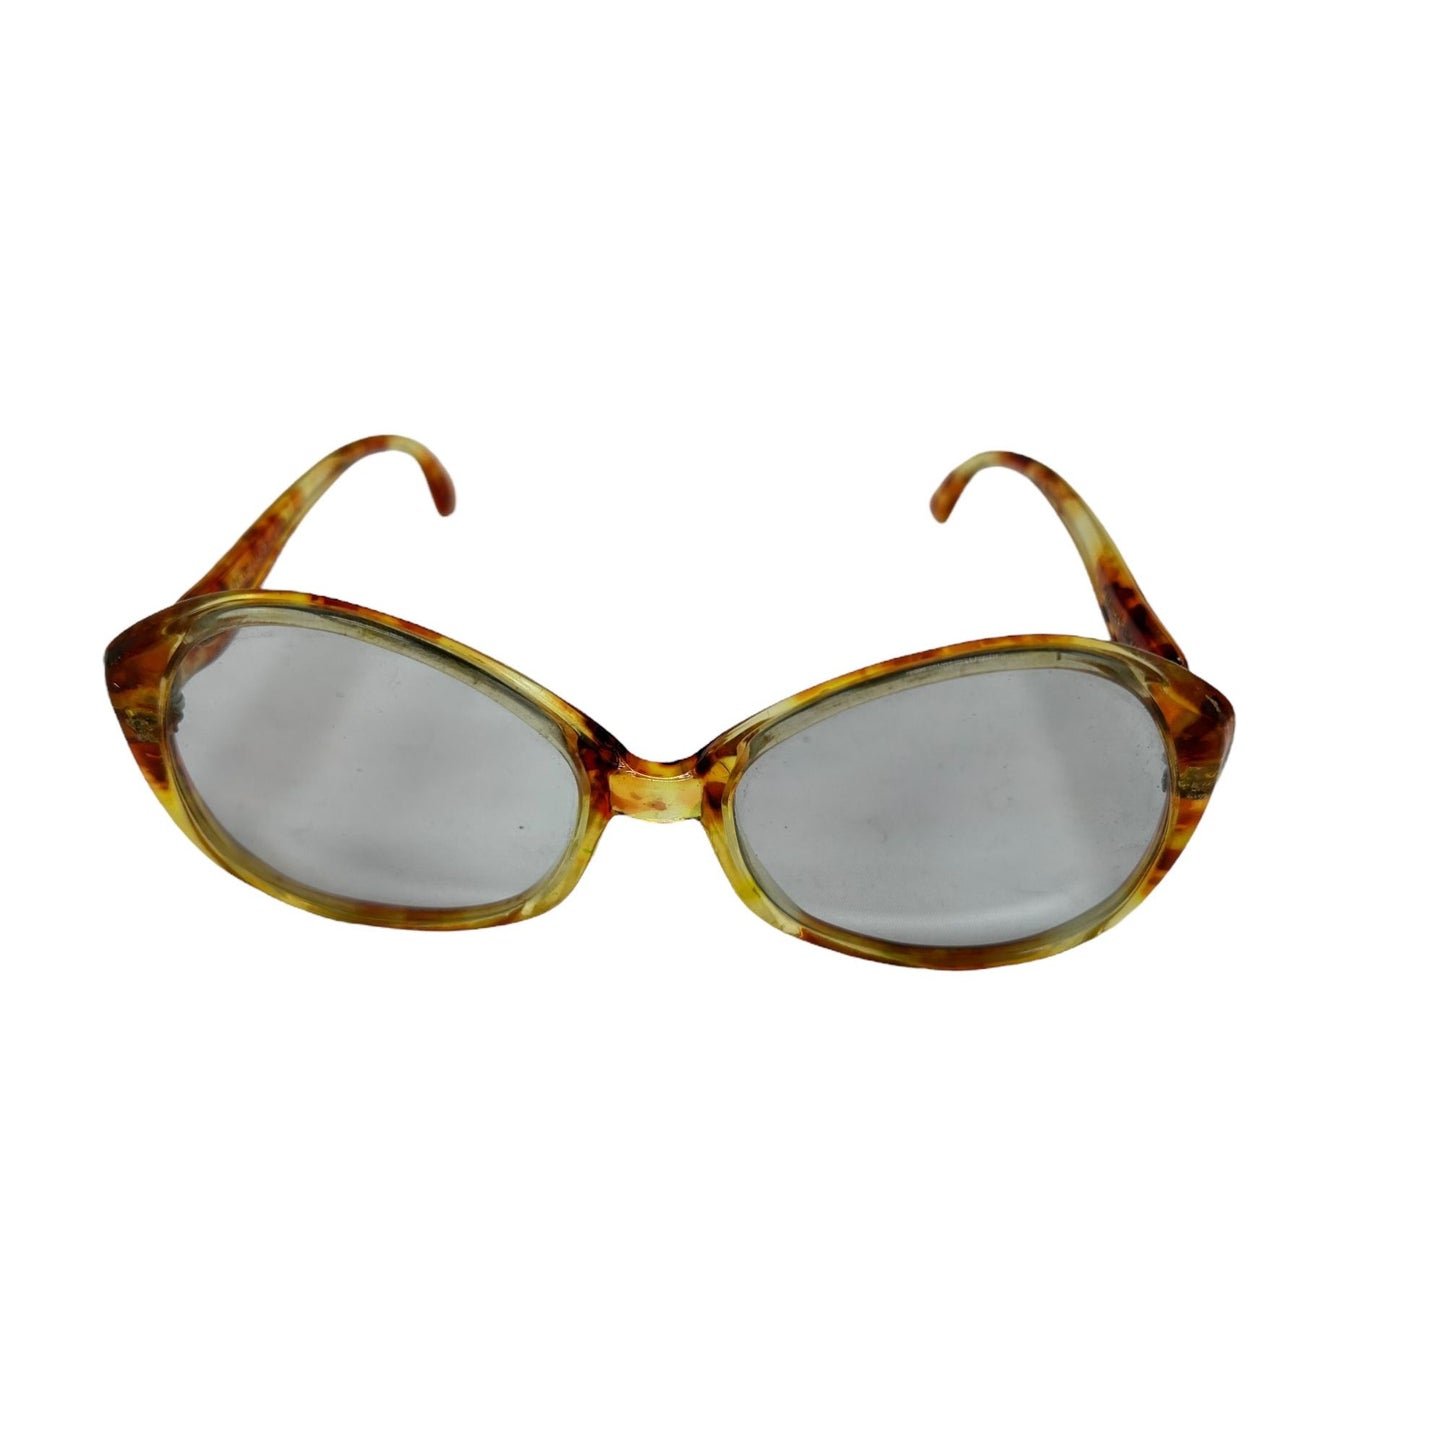 Renauld Frame Korf Vintage Womens Fashion Tortoise Round Butterfly Sunglasses Outdoor Brown